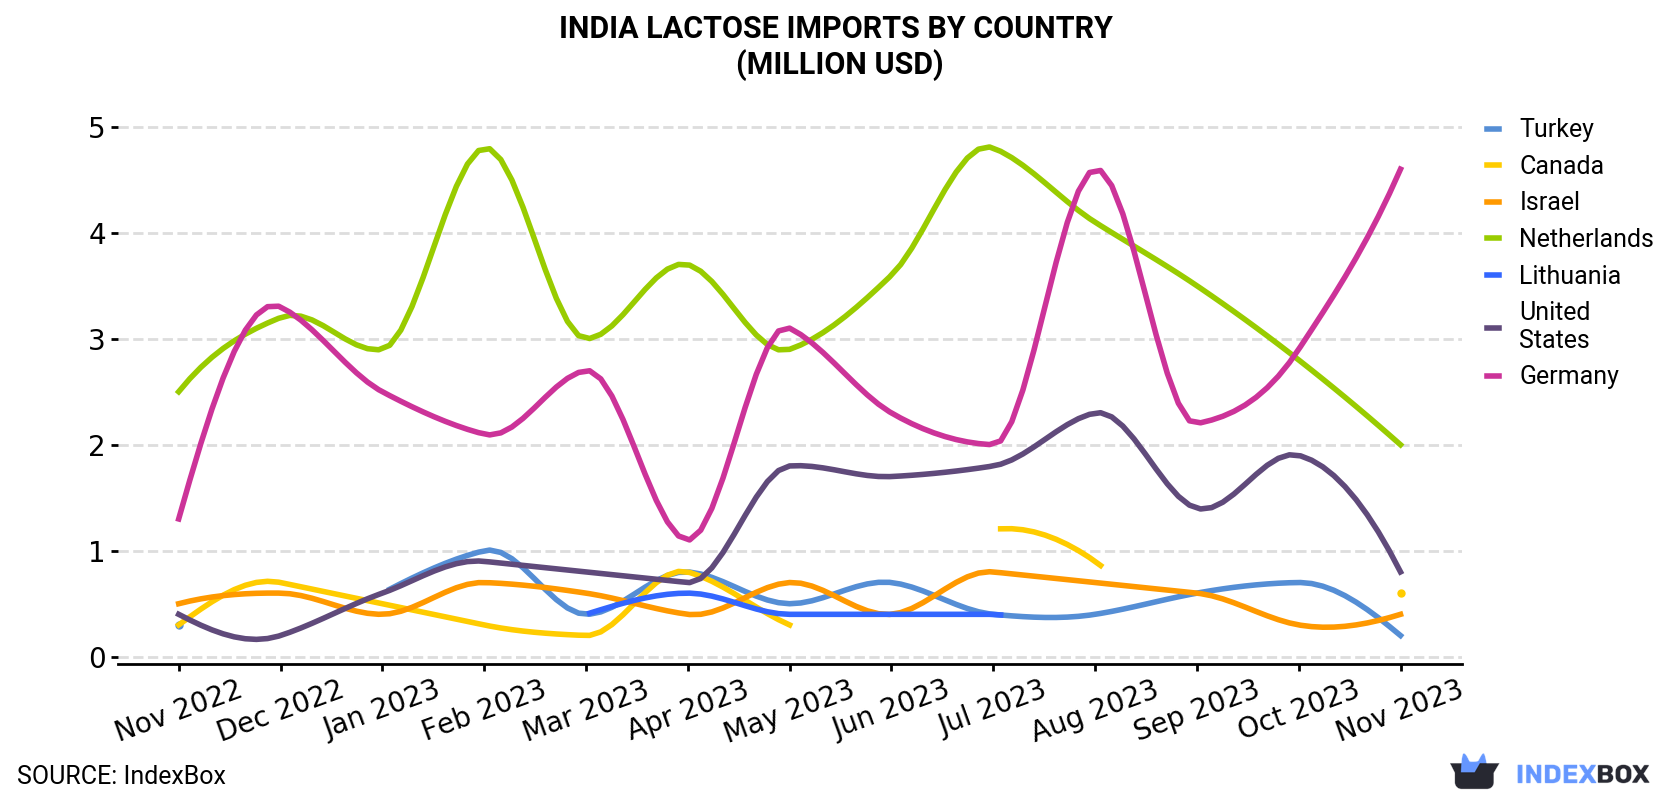 India Lactose Imports By Country (Million USD)